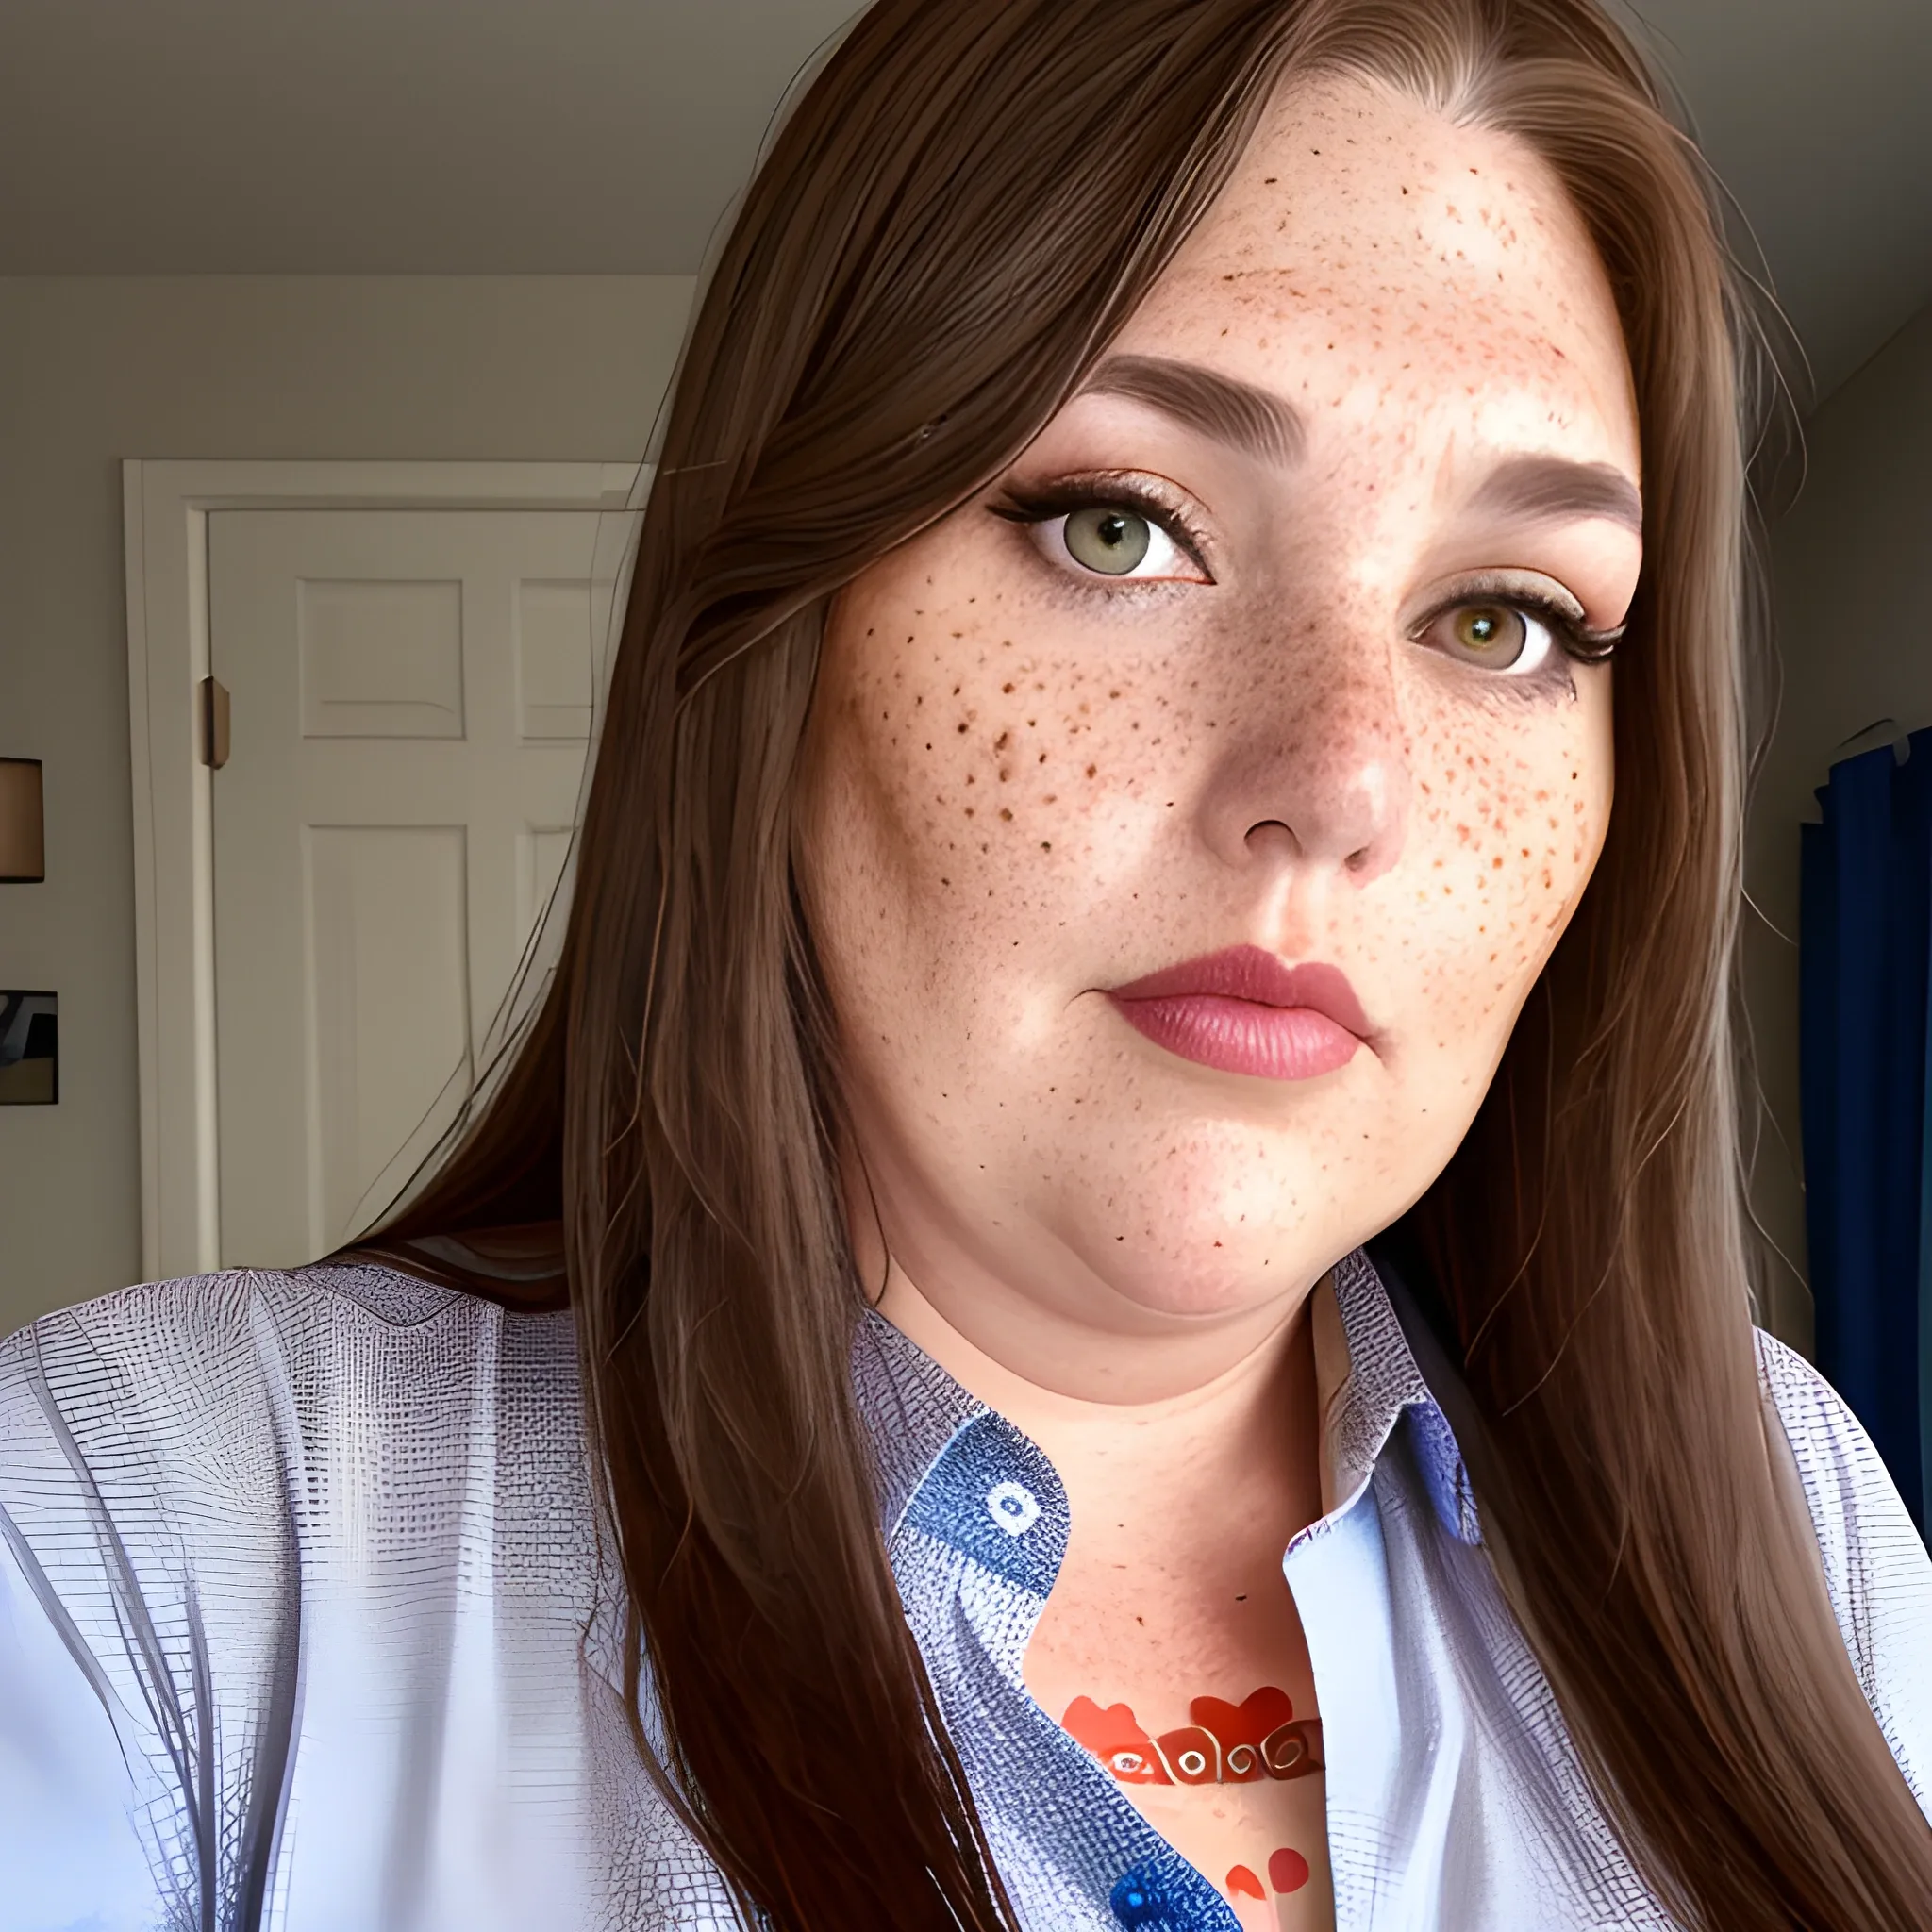 Tall beautiful plus sized, ample, middle-aged  American Woman, long straight brown hair, full lips, full face, freckles, fitted red and blue patterned shirt, looking down at the camera, up close pov, detailed, warm lighting 